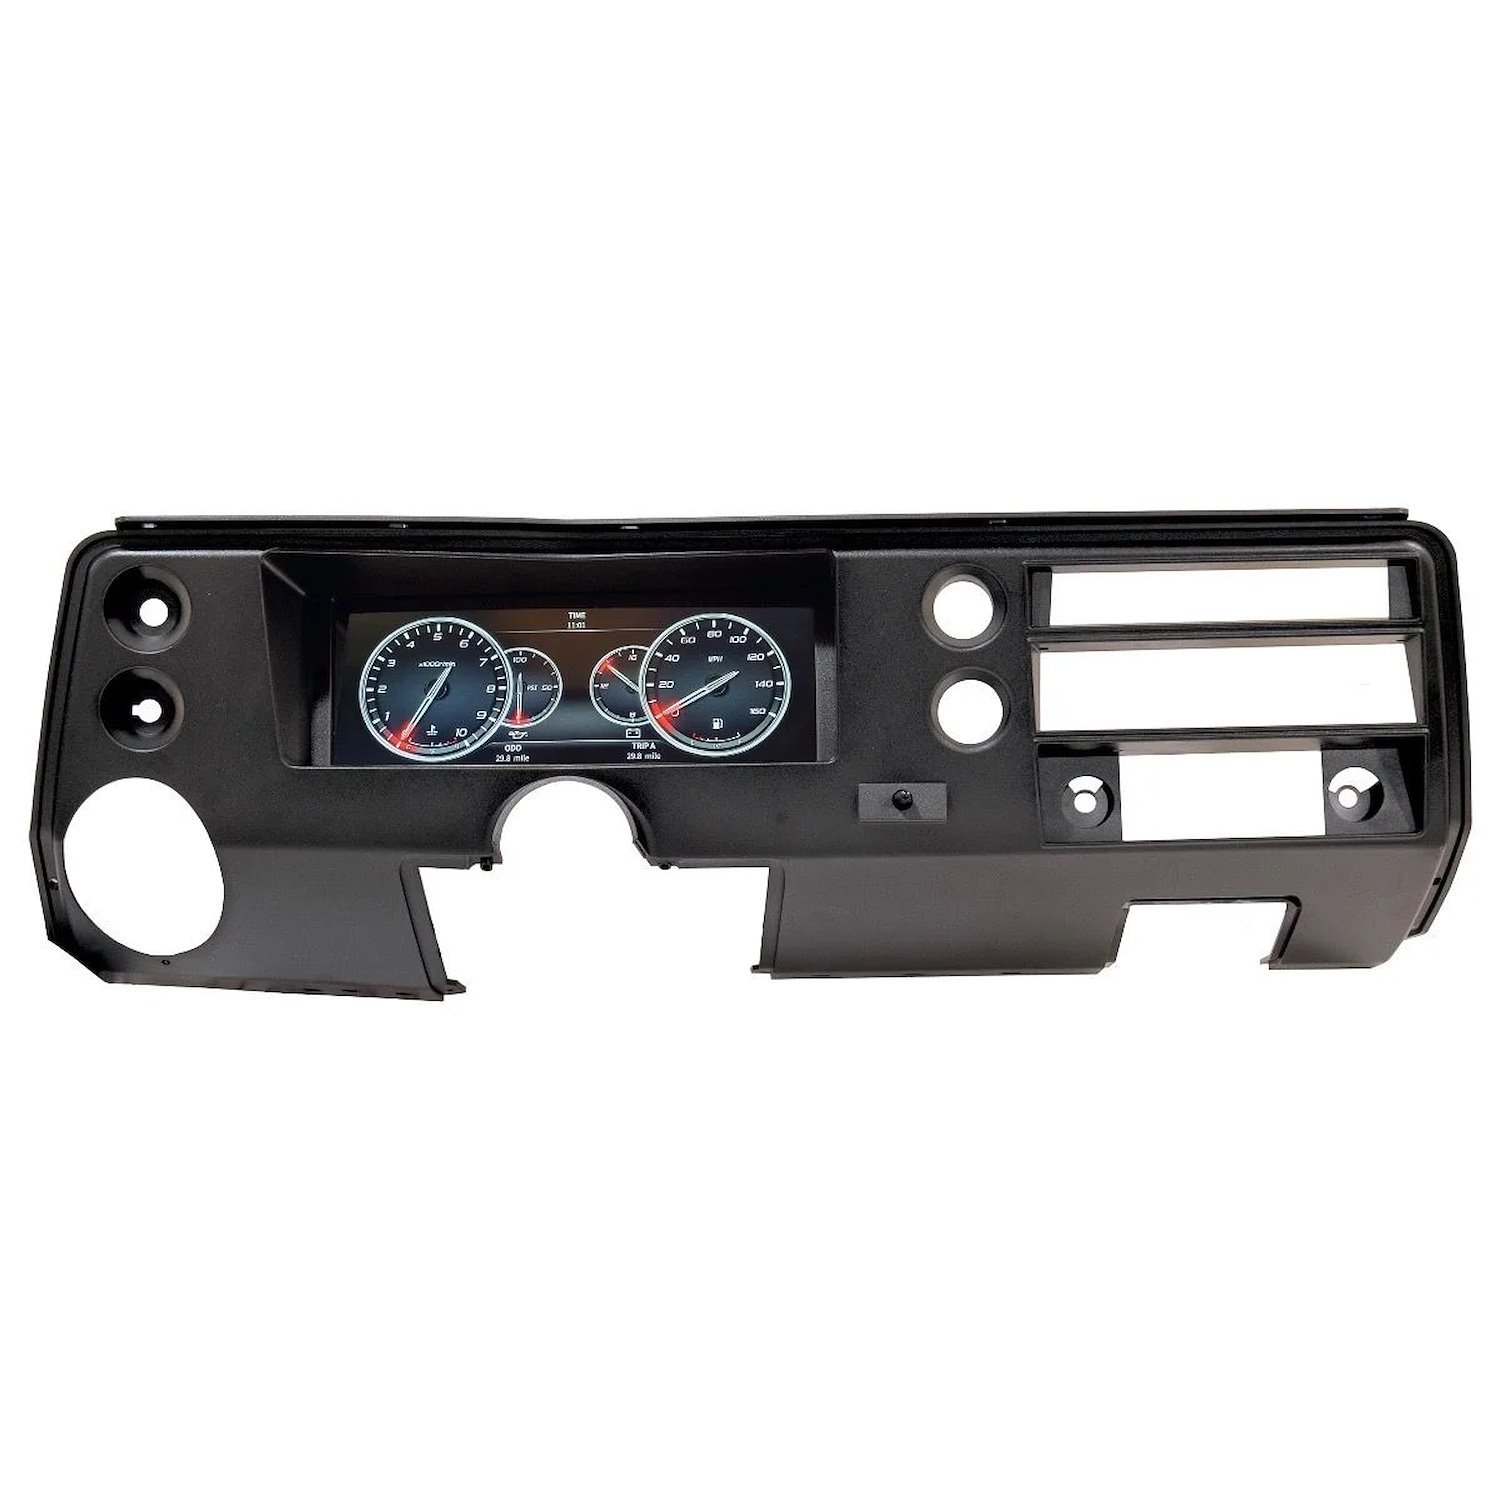 Direct-Fit Invision Digital LCD Dash Kit for 1968 Chevy Chevelle